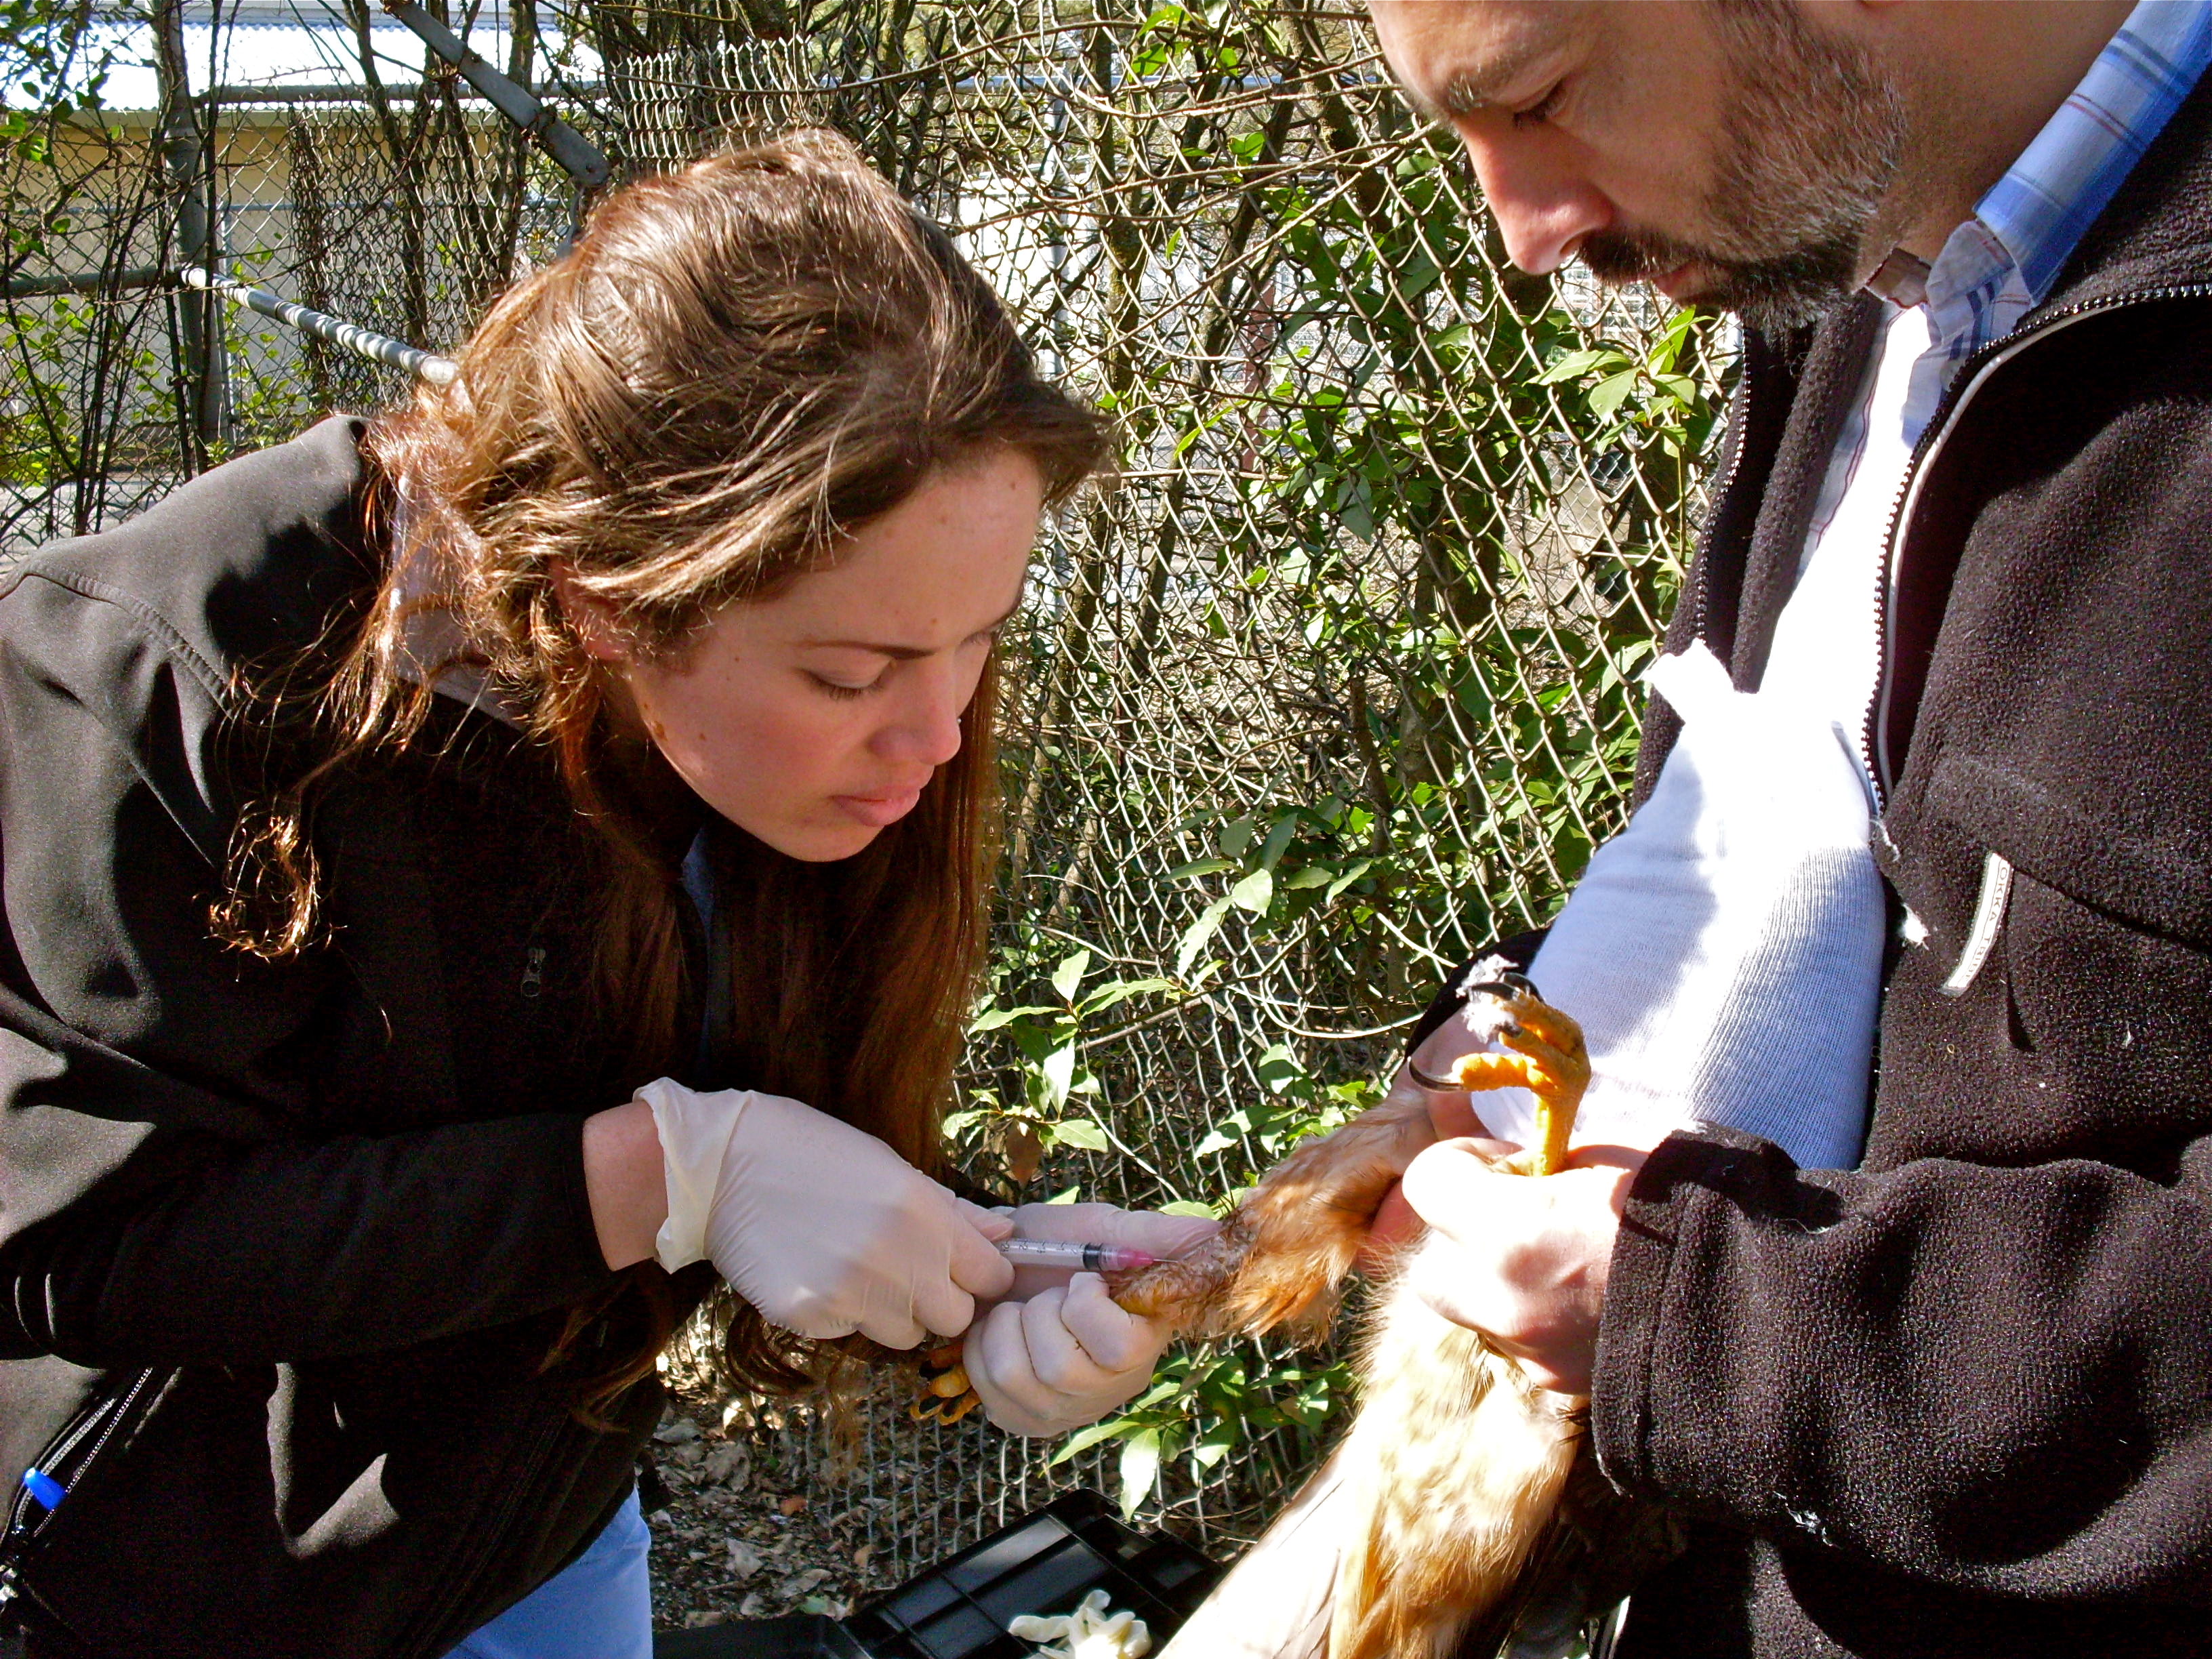 Getting blood from a Swainson's Hawk.  Raptors like hawks & owls are generally hooded during exam to help keep them calm.